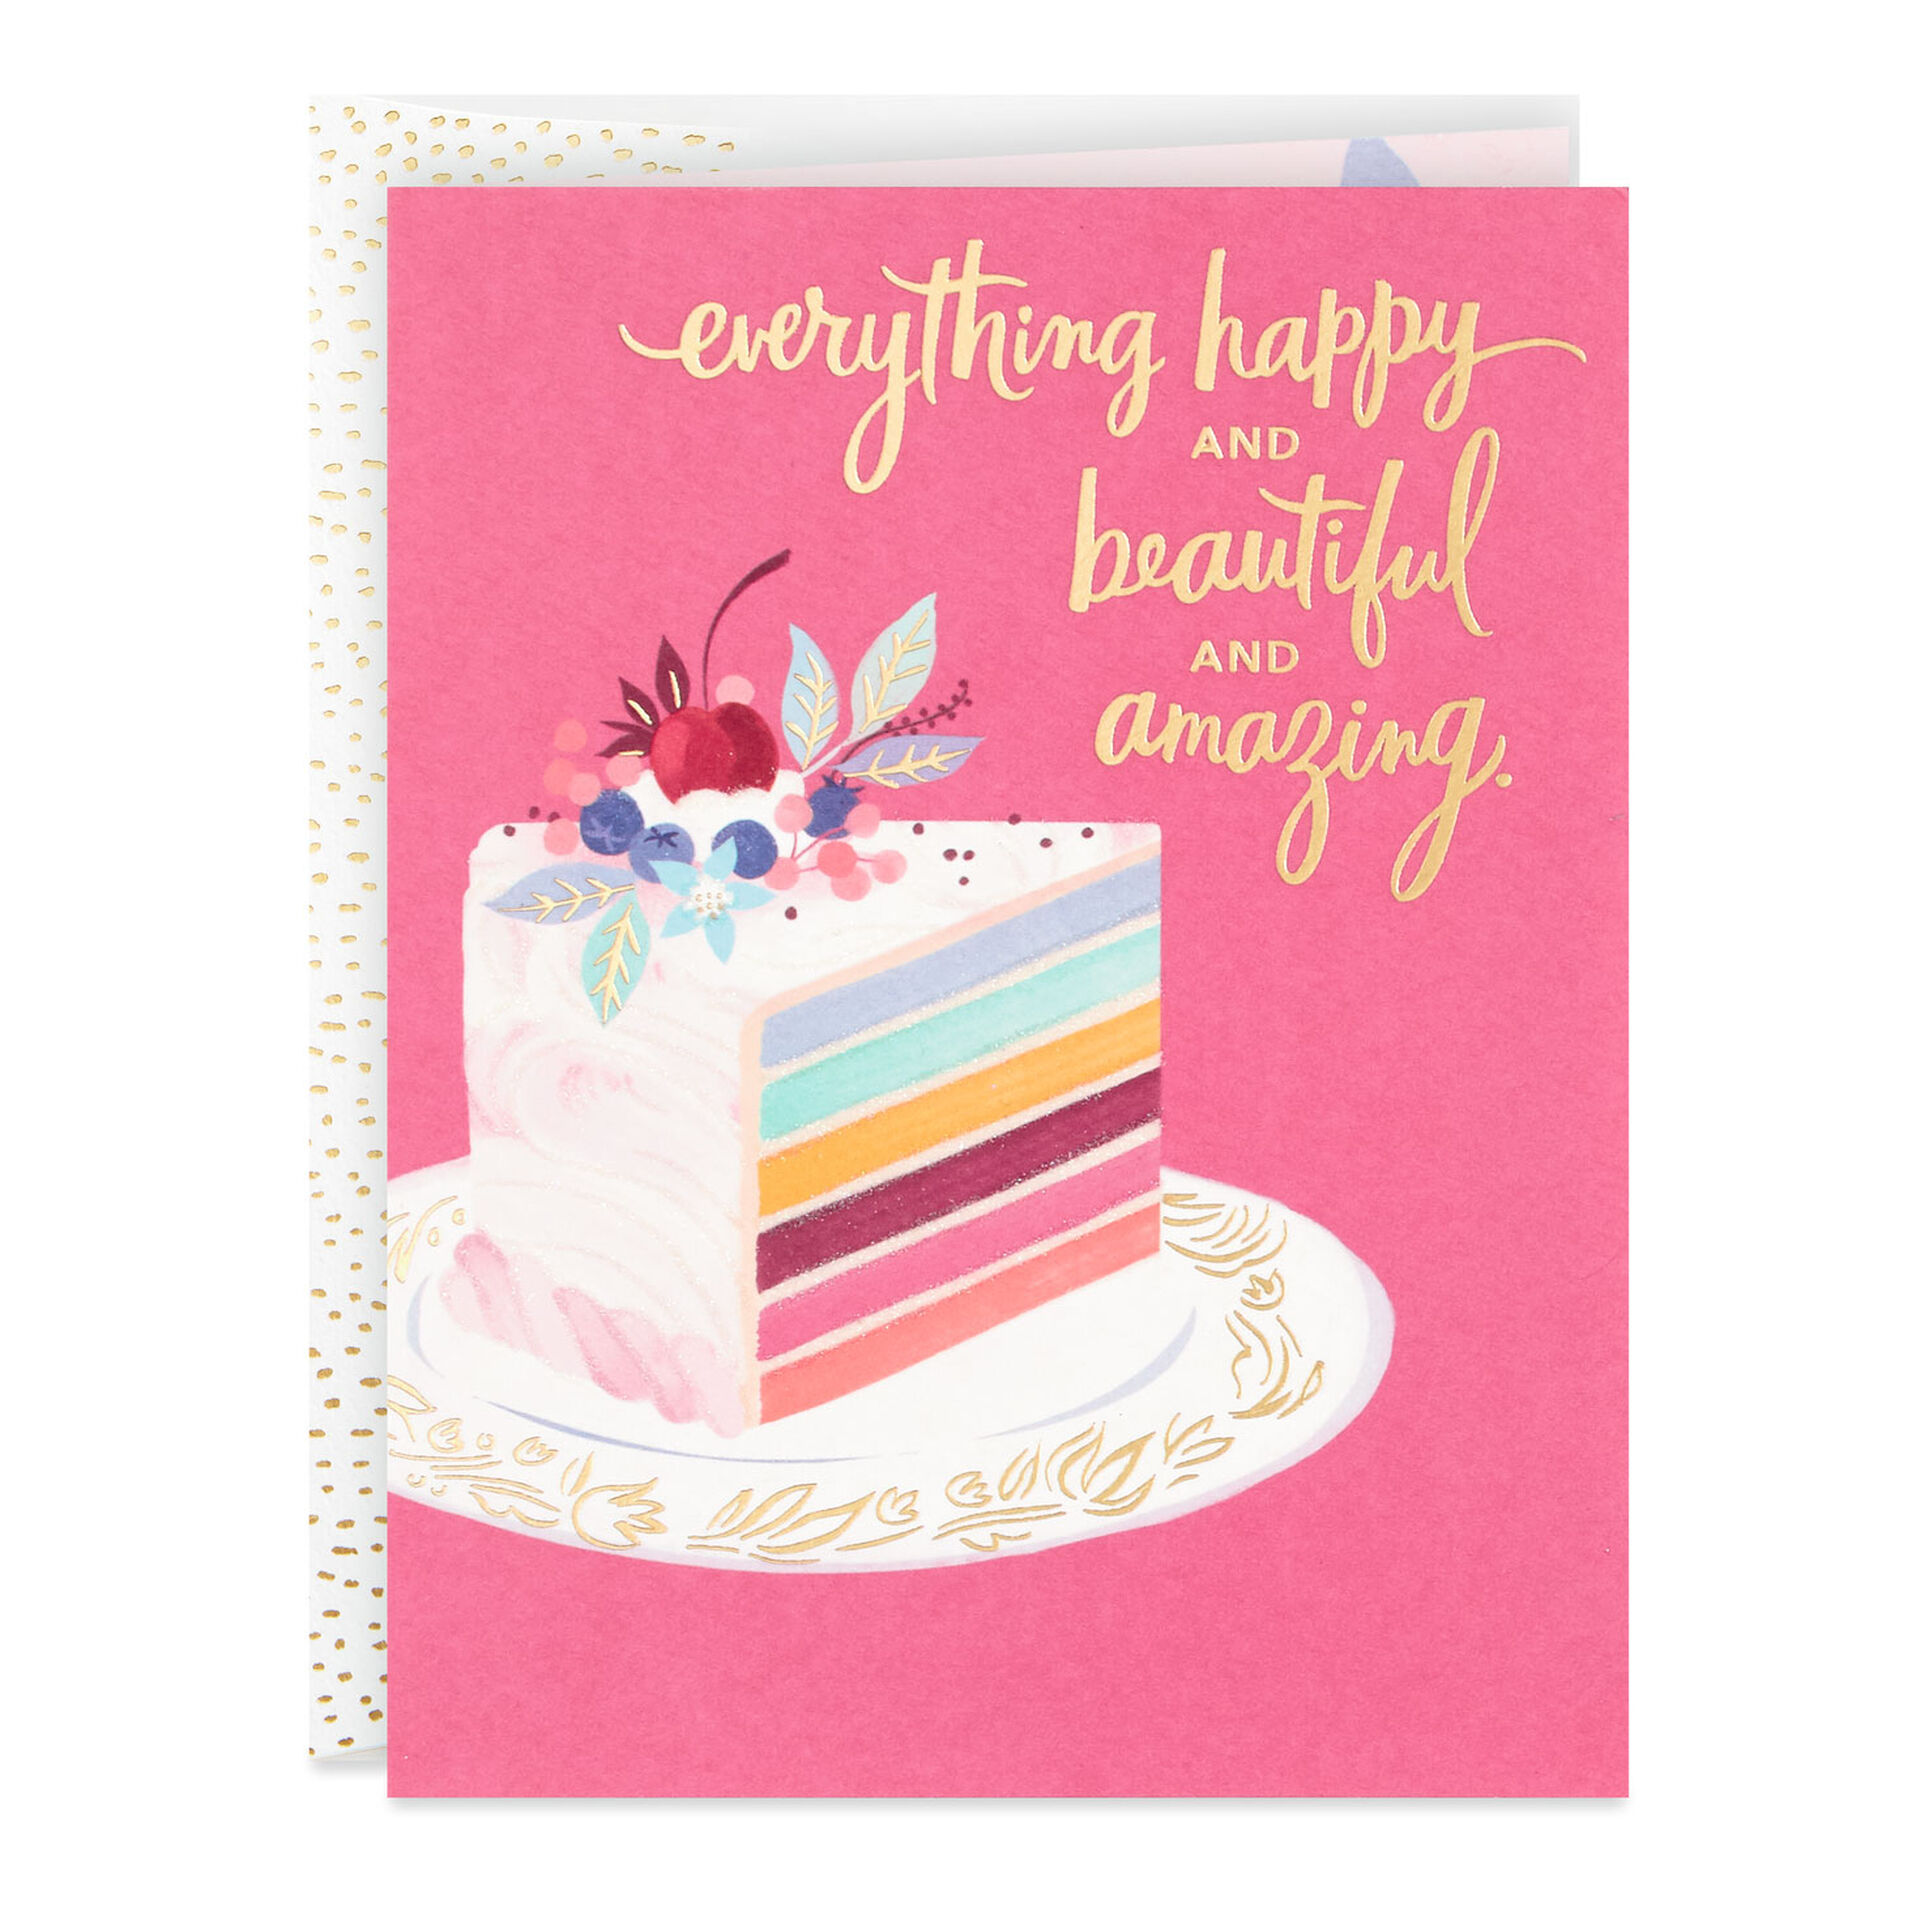 Fancy-Layered-Cake-on-a-Plate-Birthday-Card_499NED2023_01